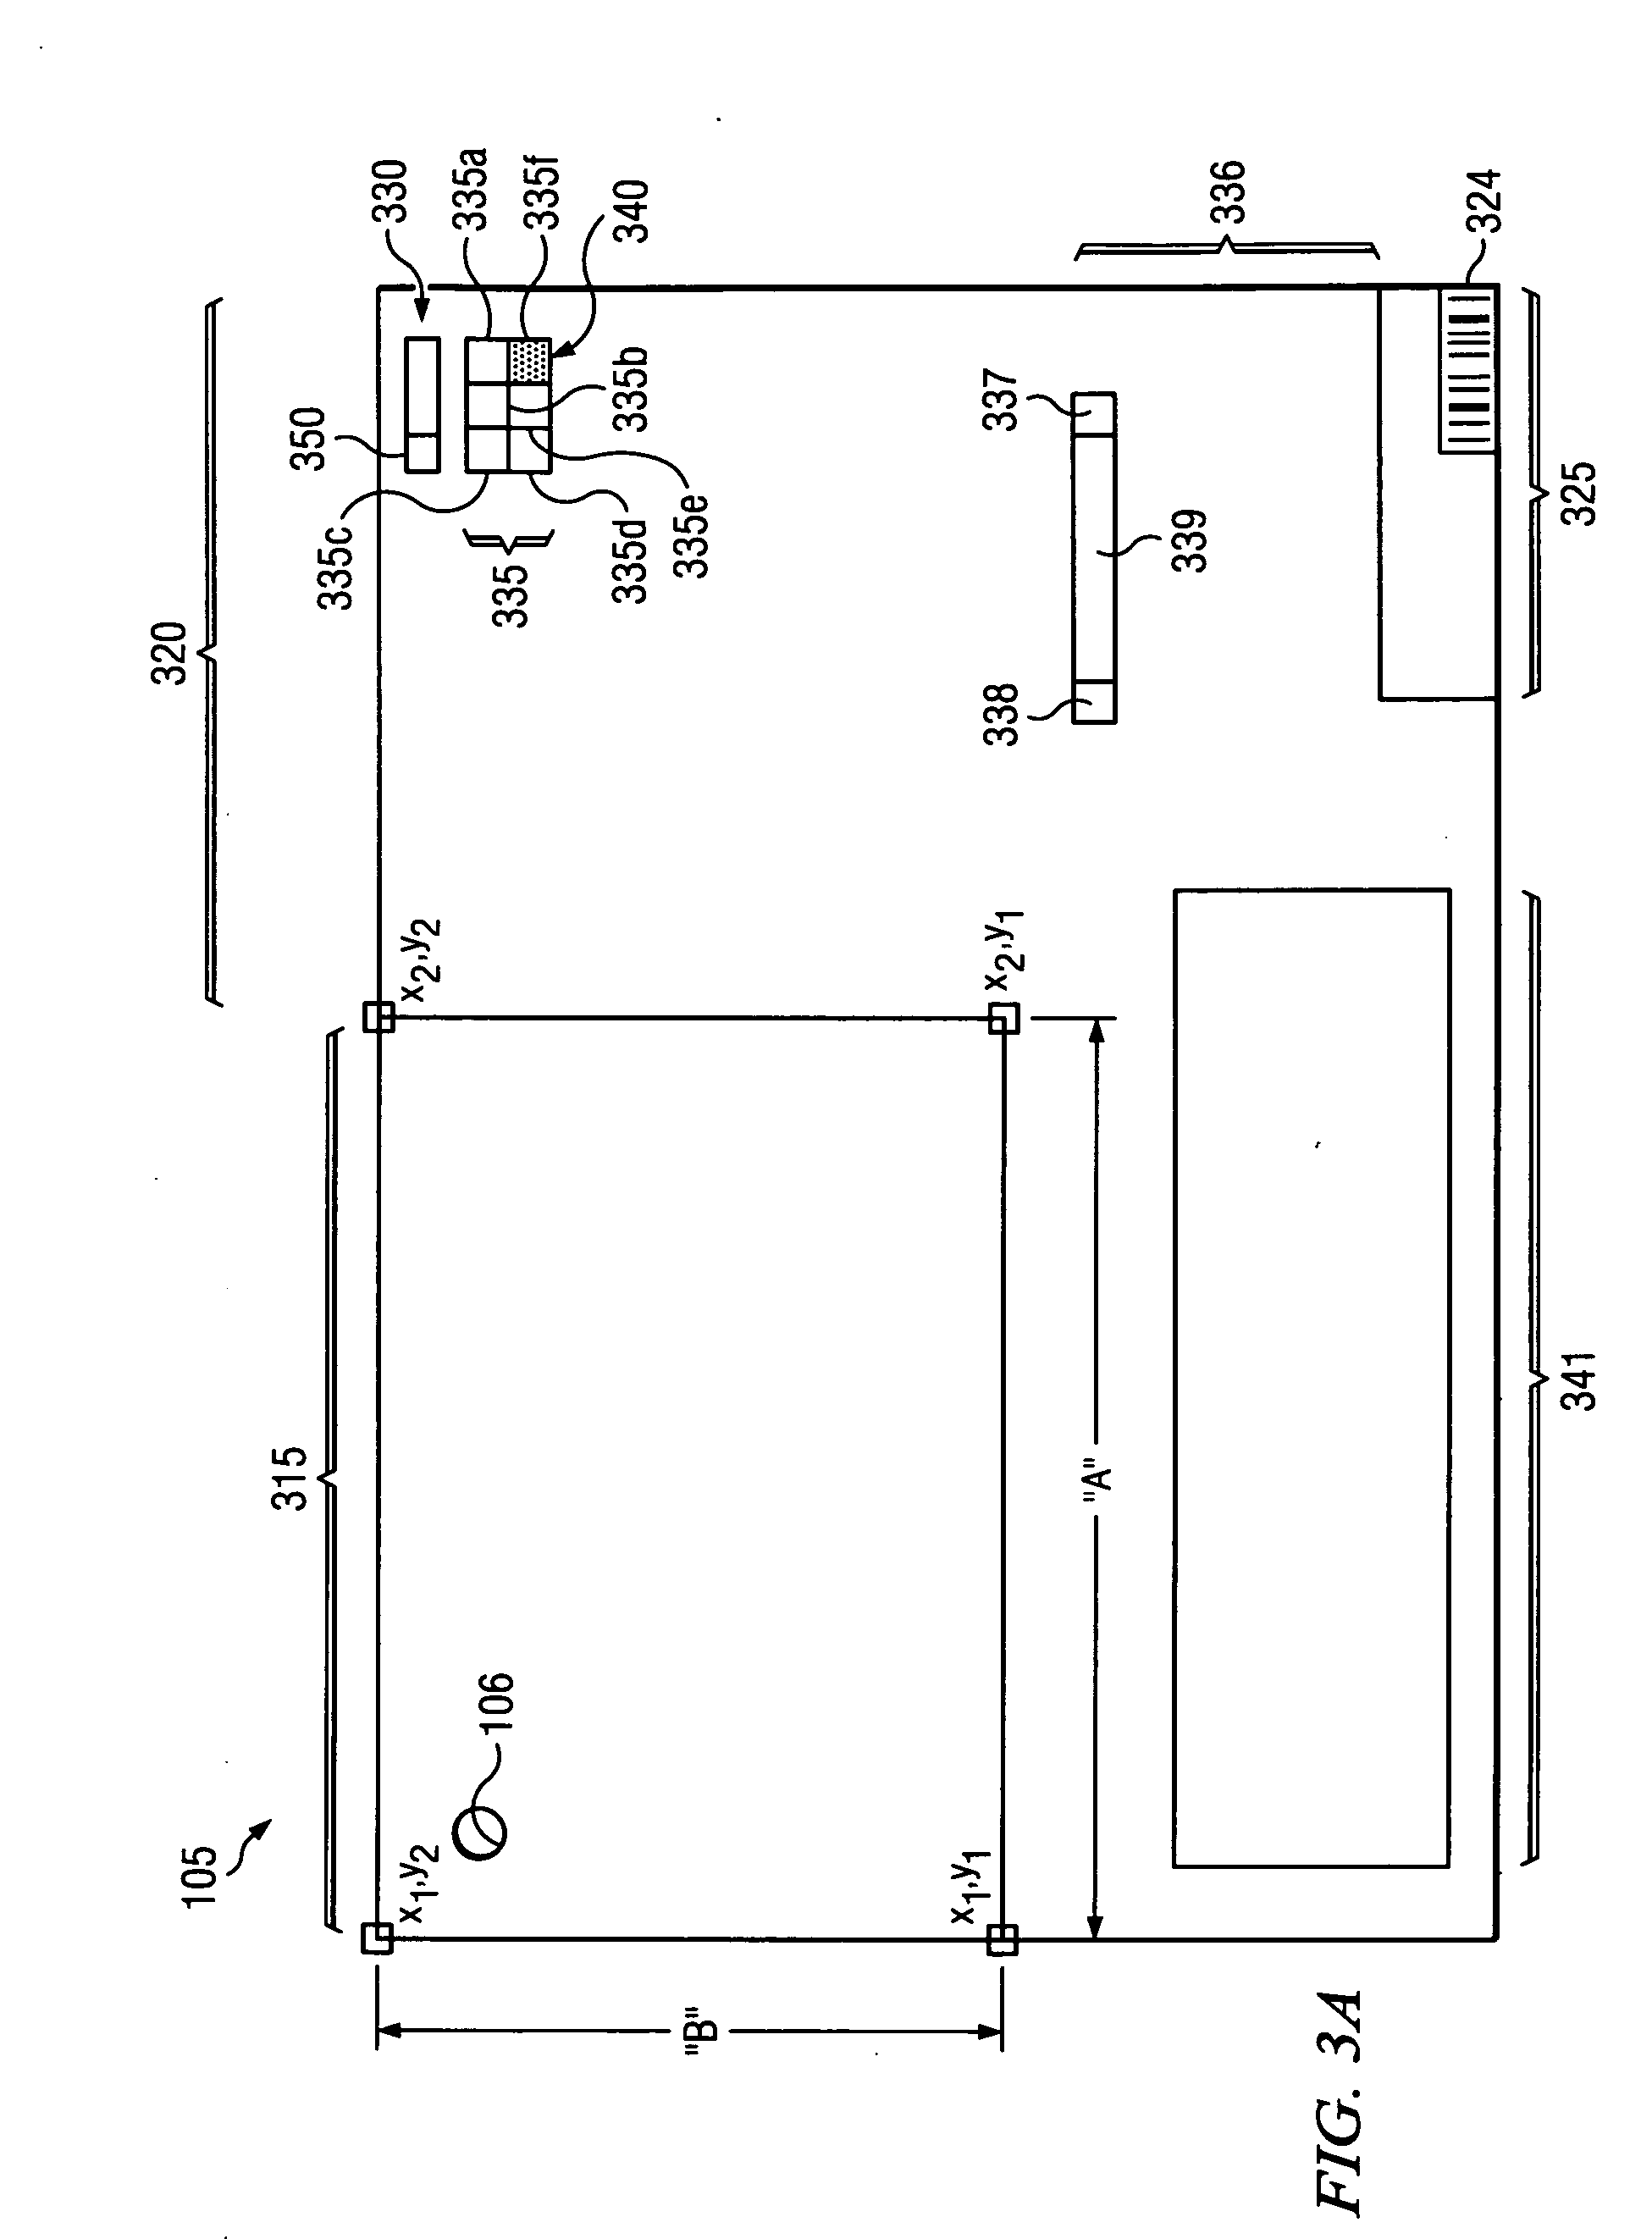 System and method of performing an engineering-based site development and risk assessment process